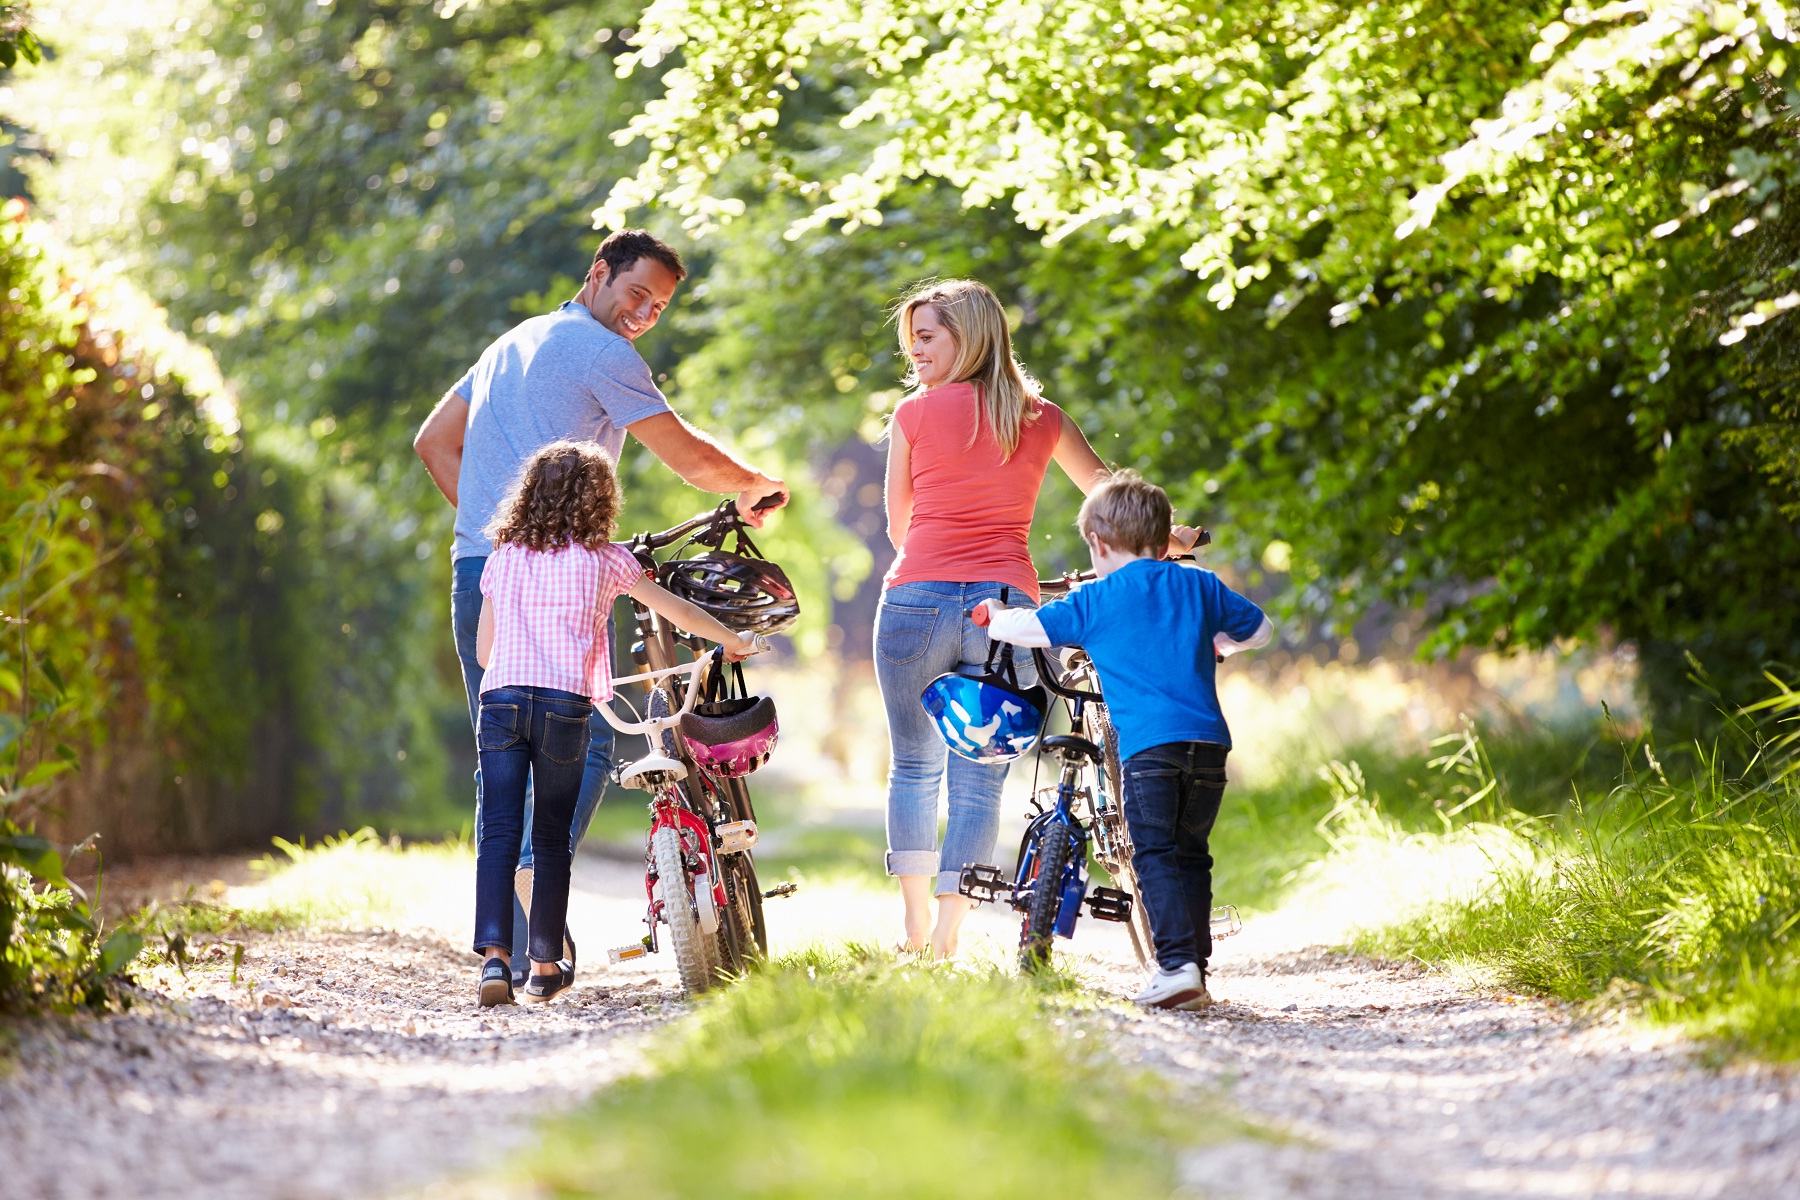 family wallpaper,people in nature,cycling,nature,bicycle,outdoor recreation